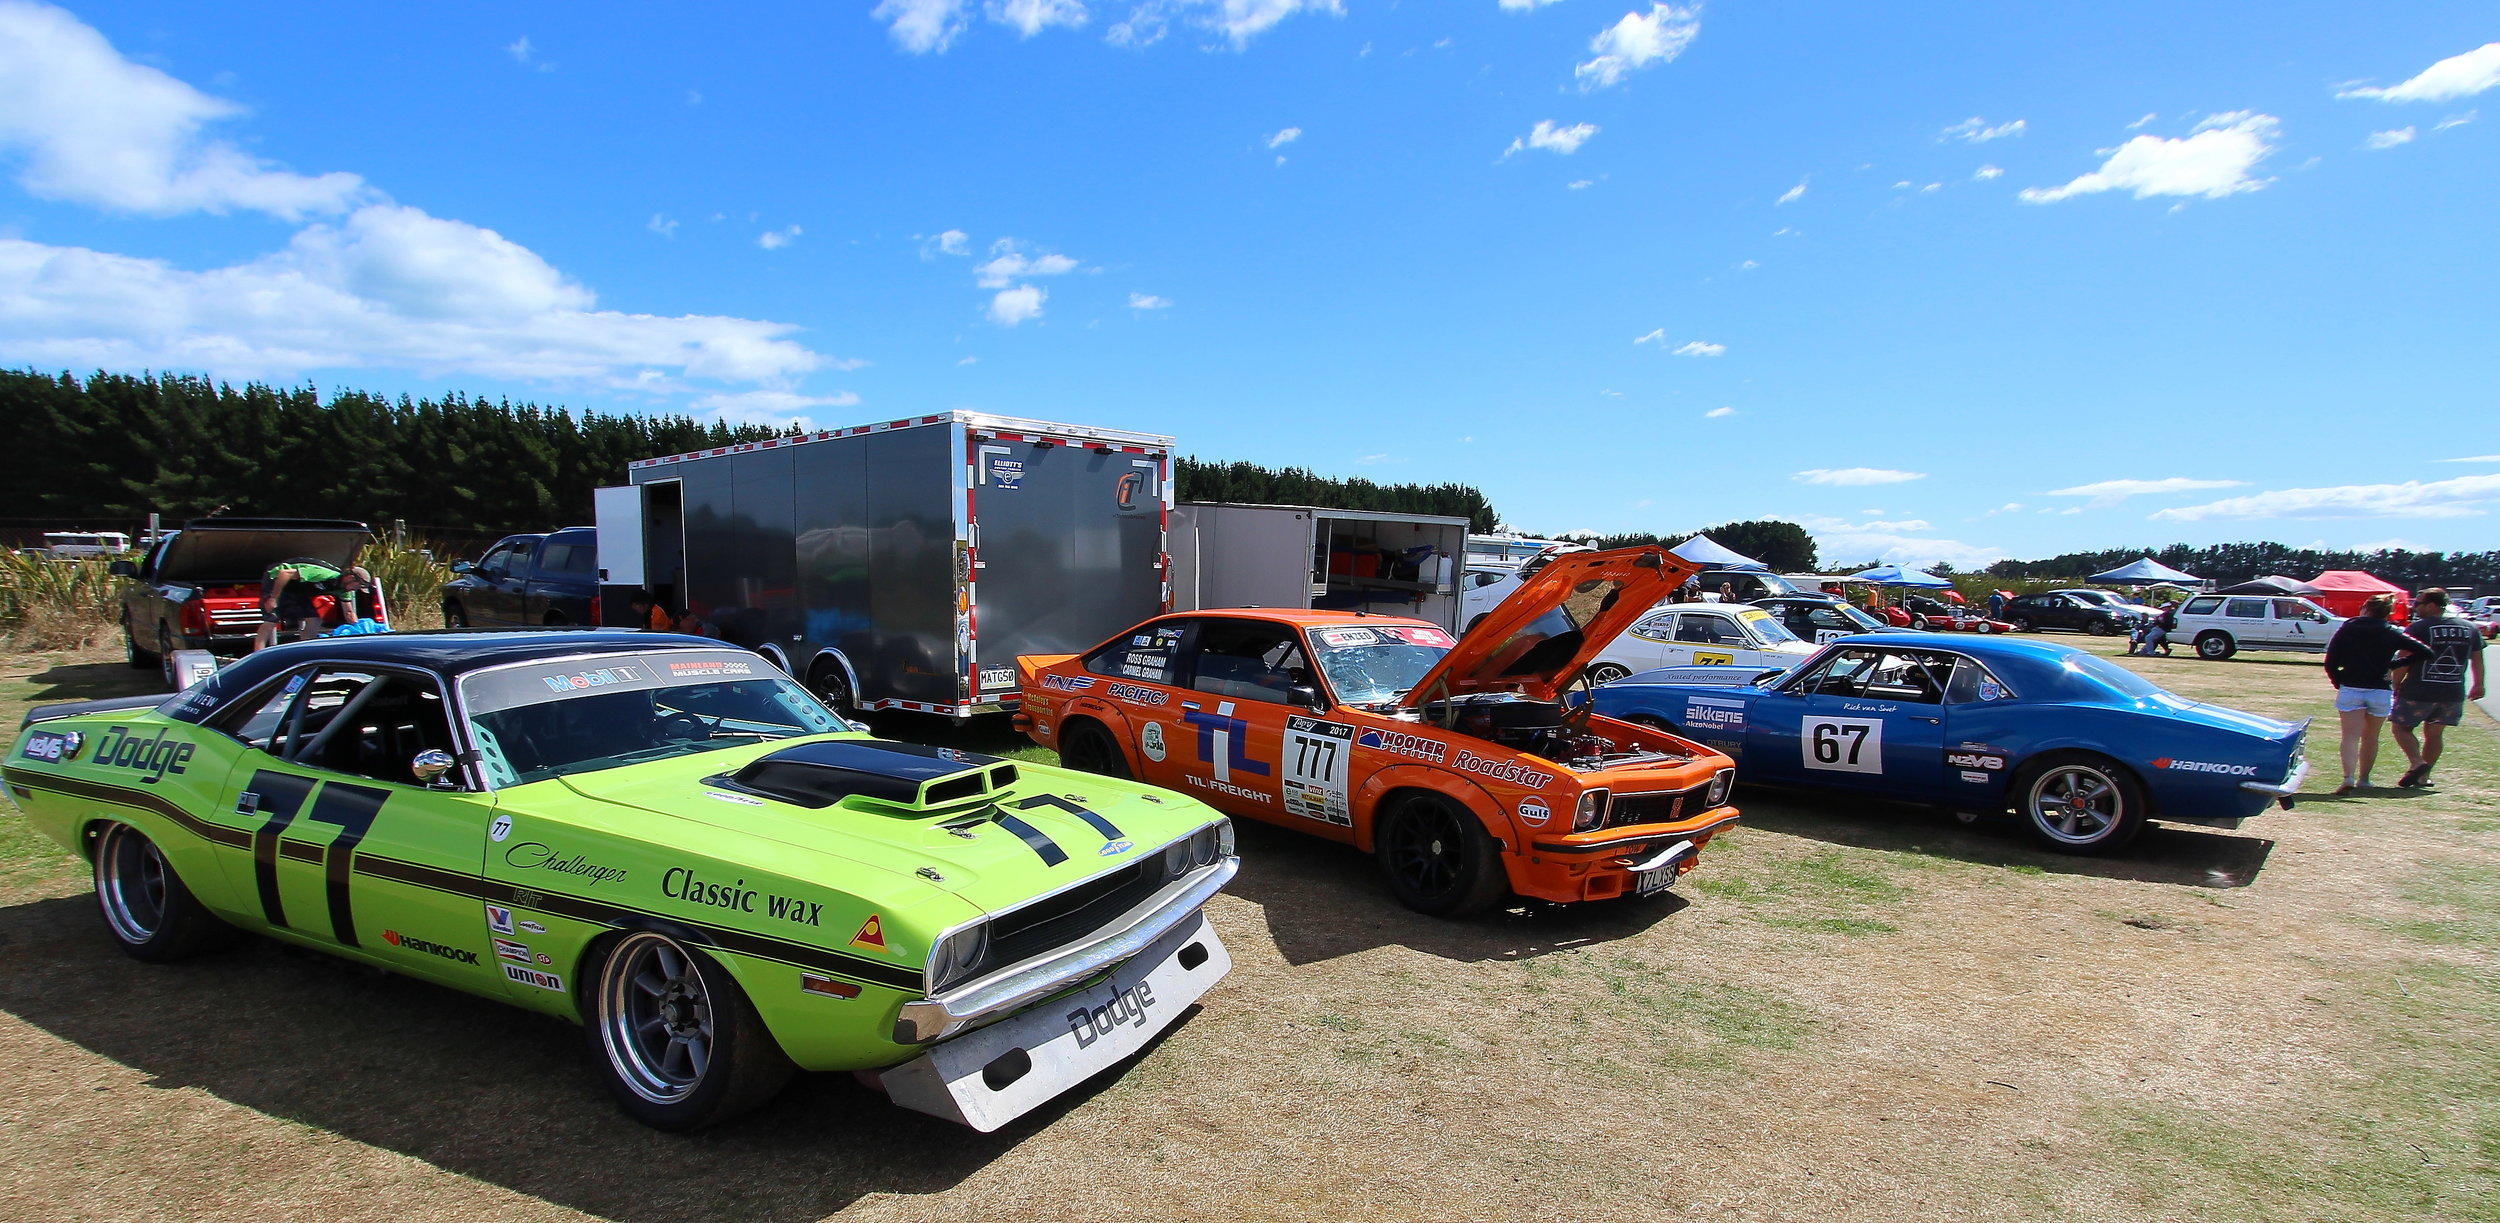  Classic saloons with Duane Ingley’s (Queenstown) Dodge Challenger (#77) and Ross Graham’s (New Plymouth) Holden Torana (#777) and Rick van Swet’s (Auckland) Chevrolet Camaro (#67) 